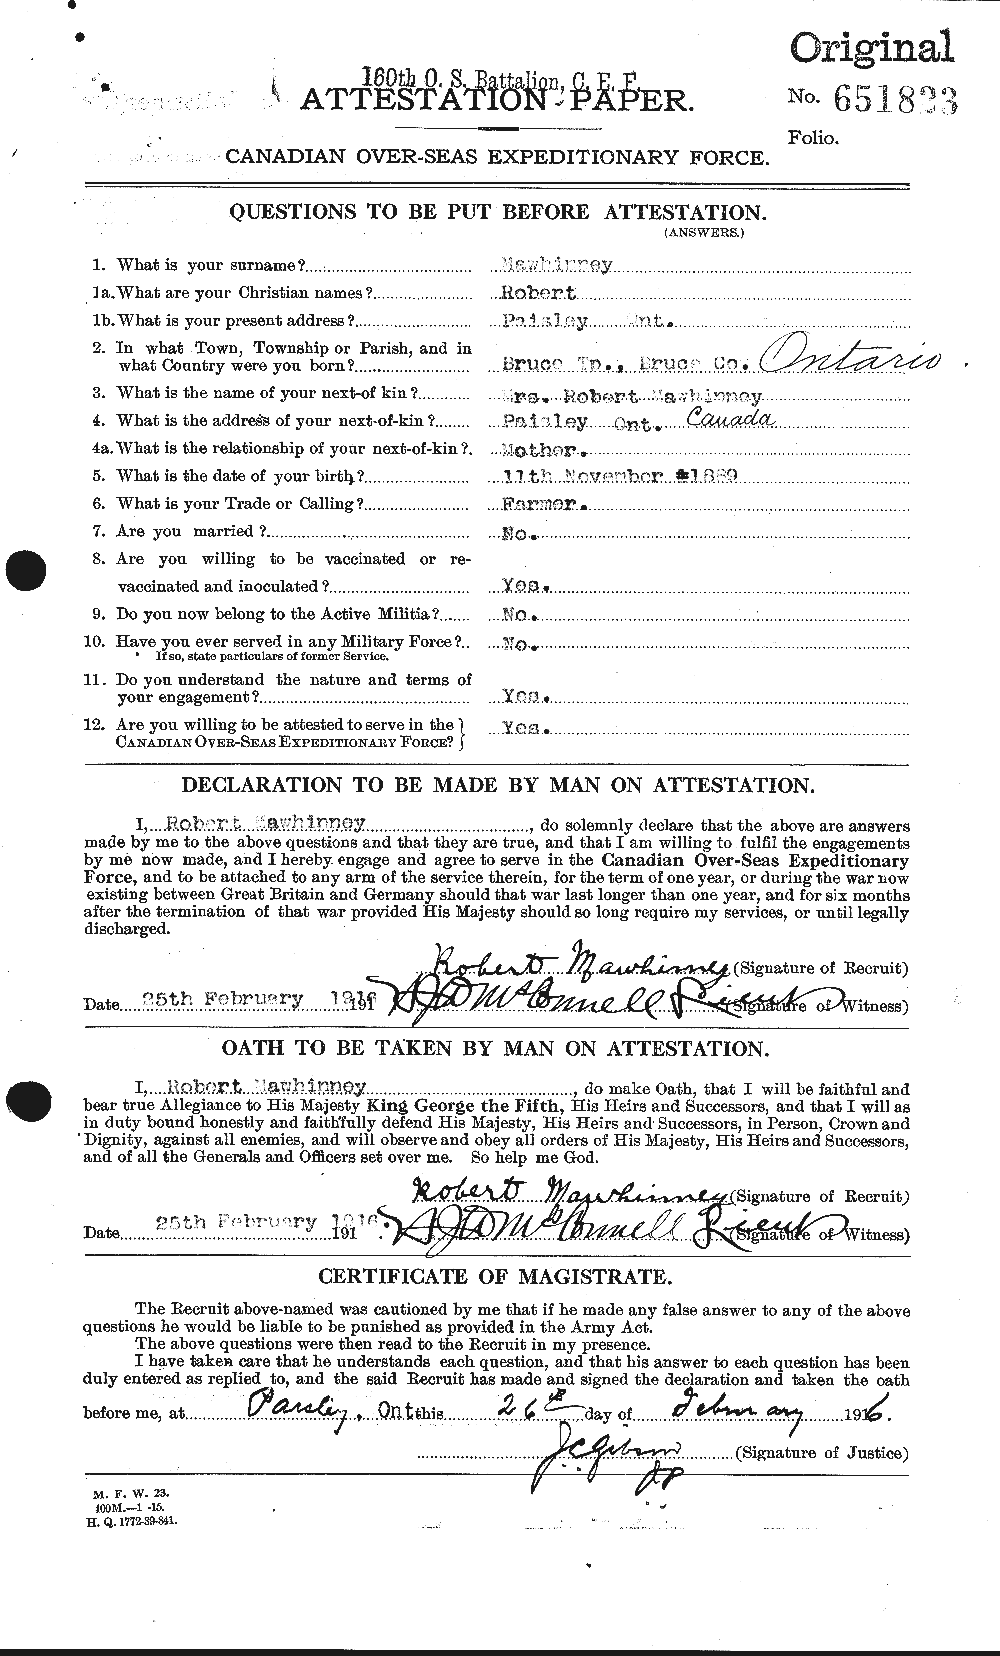 Personnel Records of the First World War - CEF 487998a